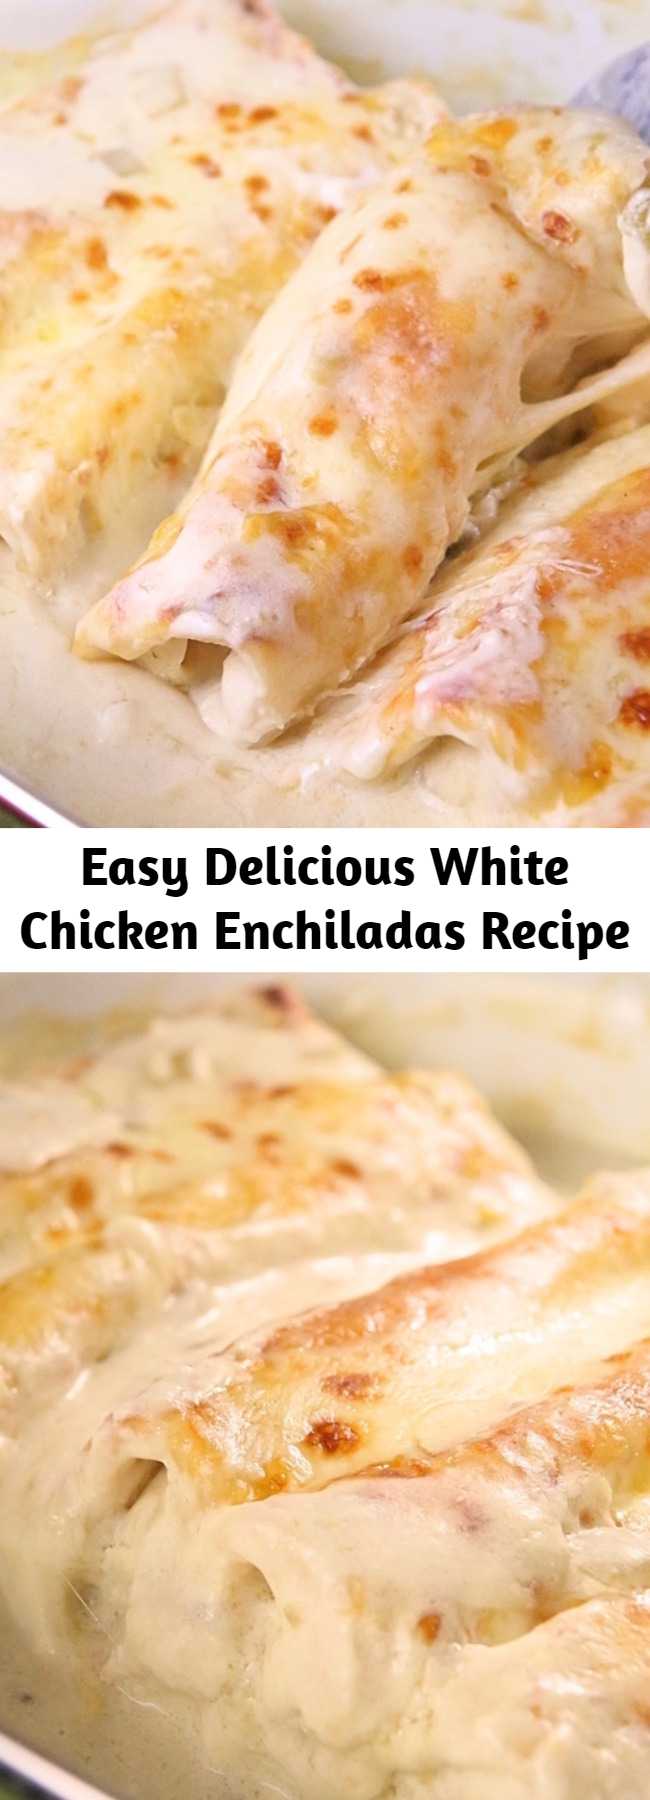 Easy Delicious White Chicken Enchiladas Recipe - This White Chicken Enchiladas Recipe is EASY and delicious! Sour cream and green chilies make the creamiest sauce. I guess I was drawn by the simplicity of the recipe and of course how creamy and yummy it looked.